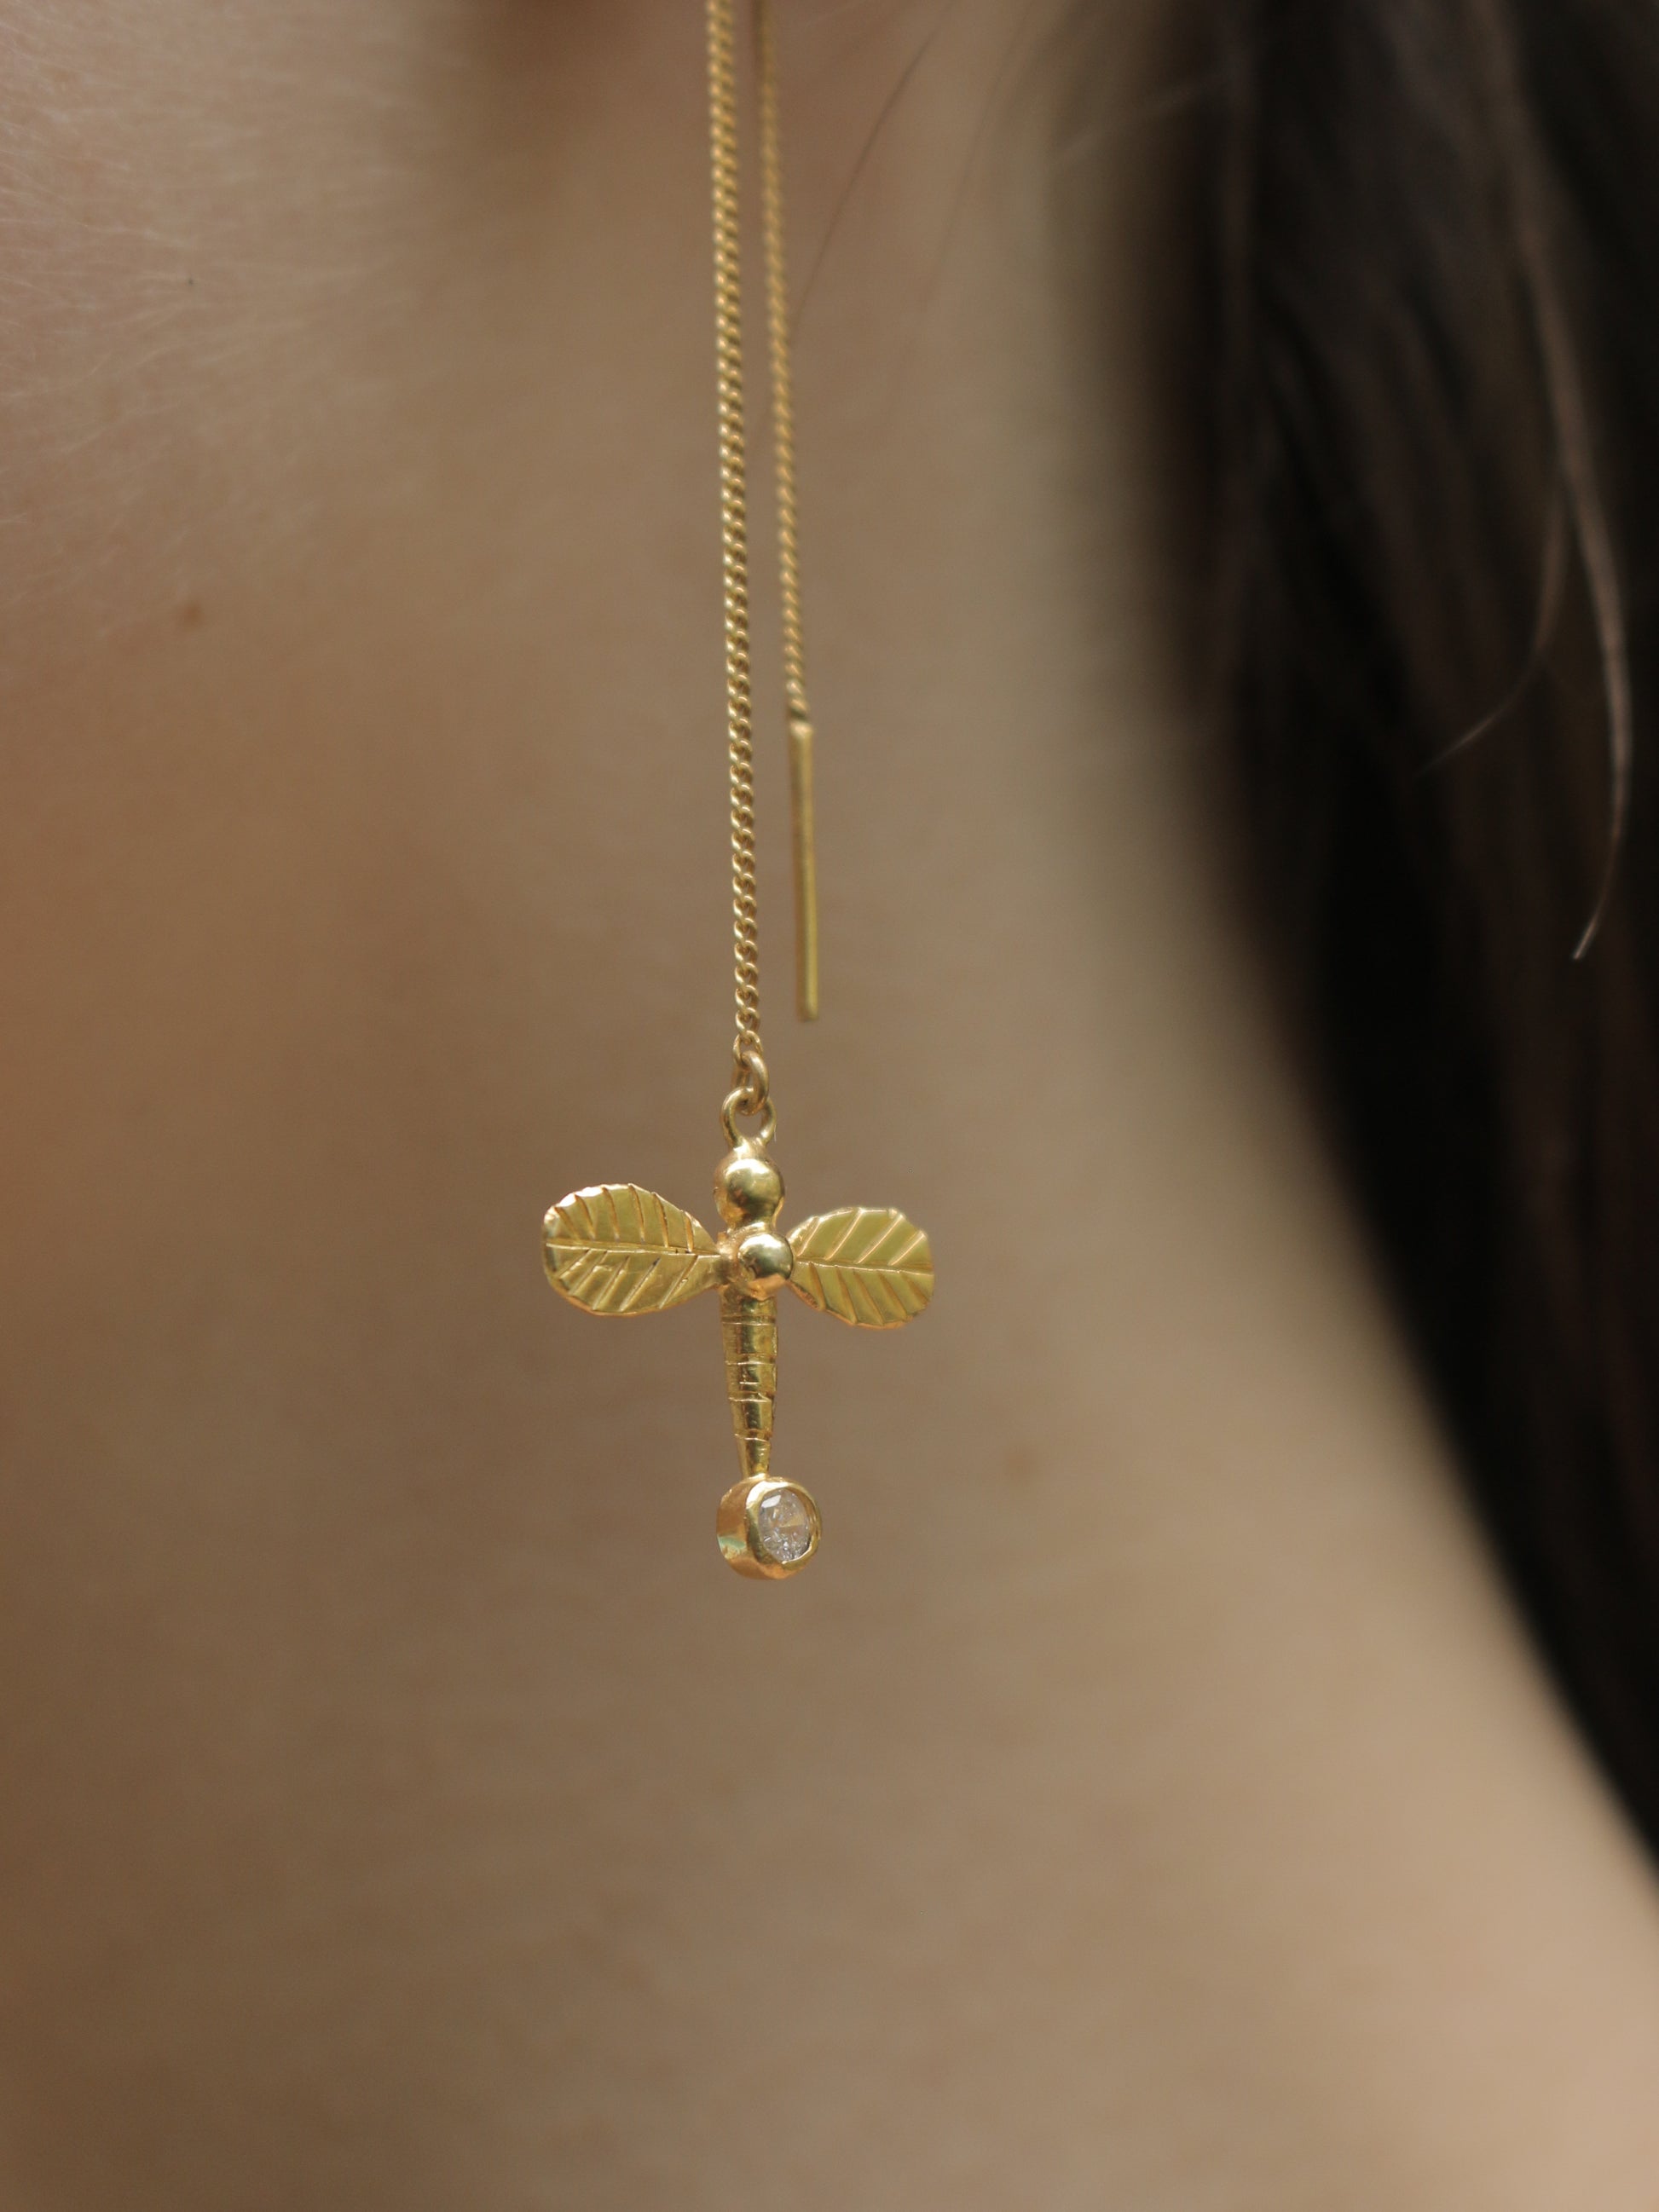 Dragonfly gold earrings close up photo